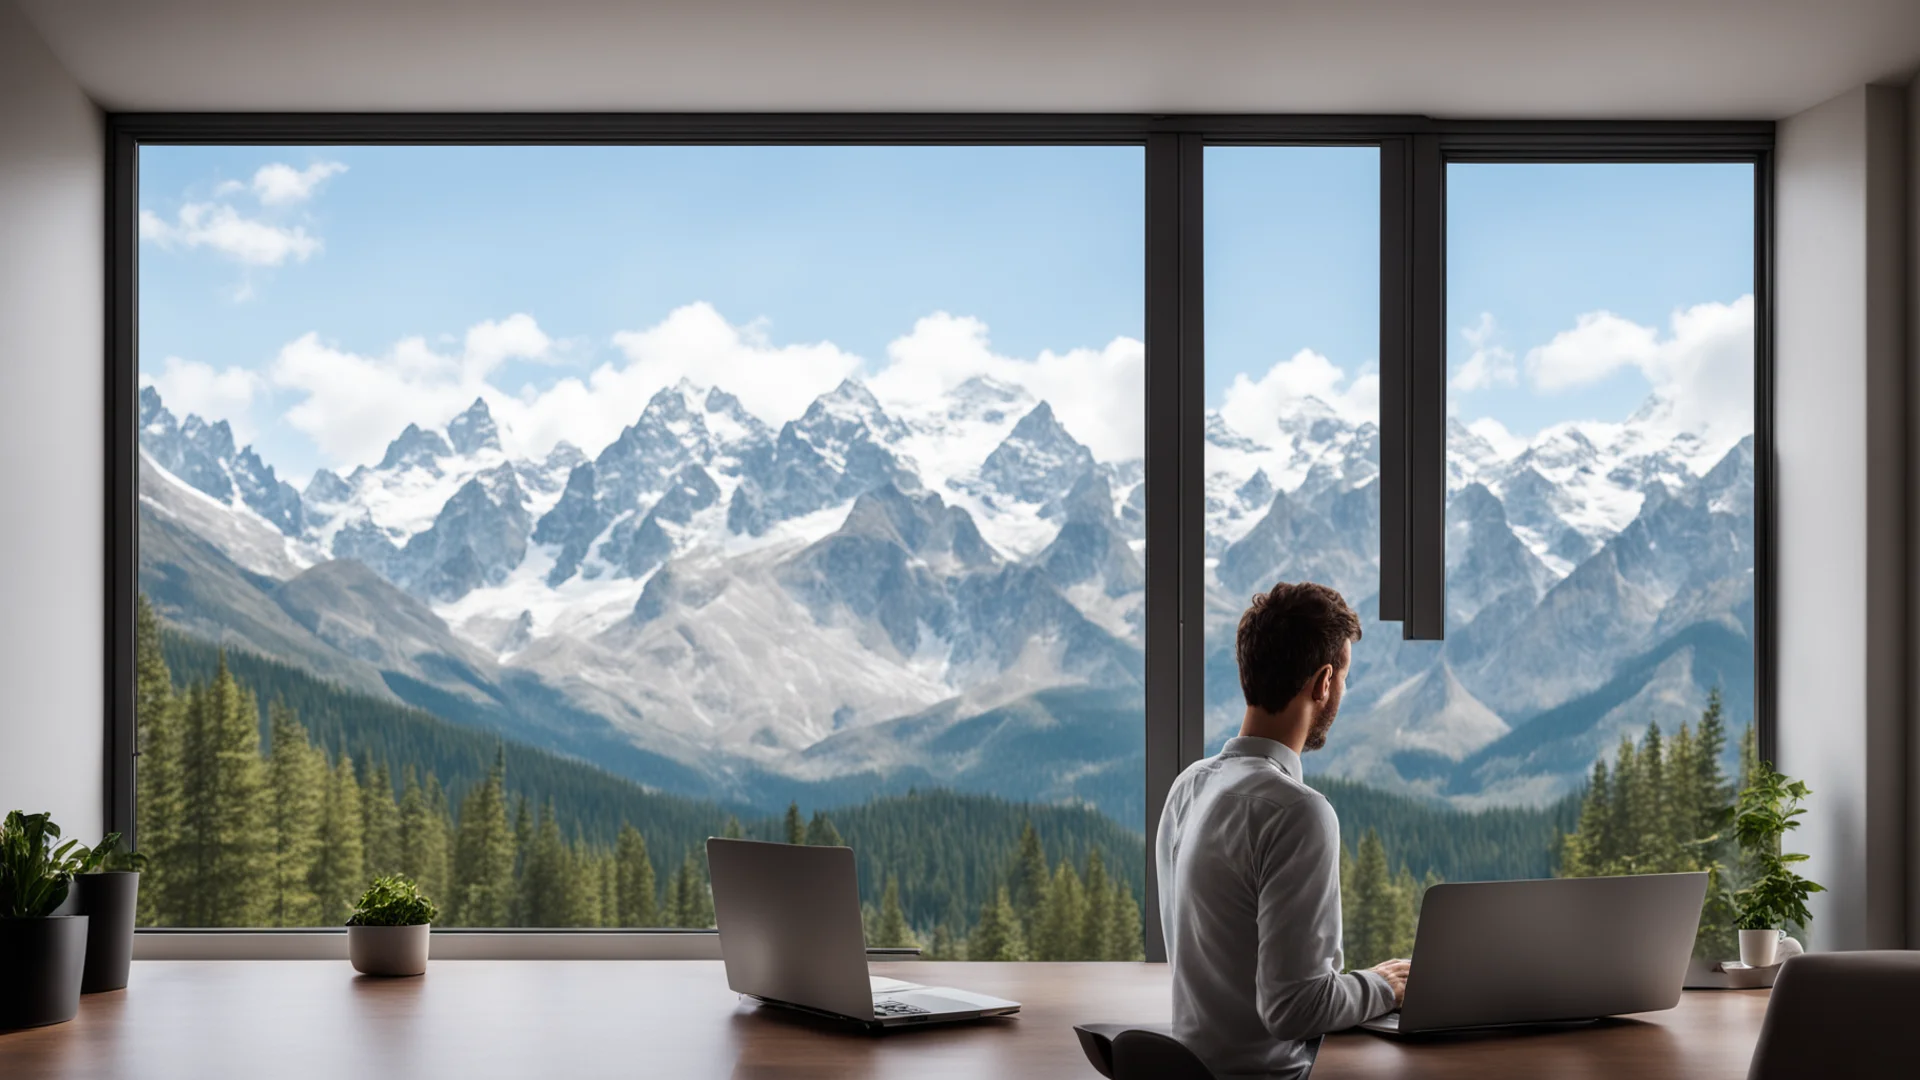  working man on laptop with mountains outside the window amazing awesome portrait 2 wide